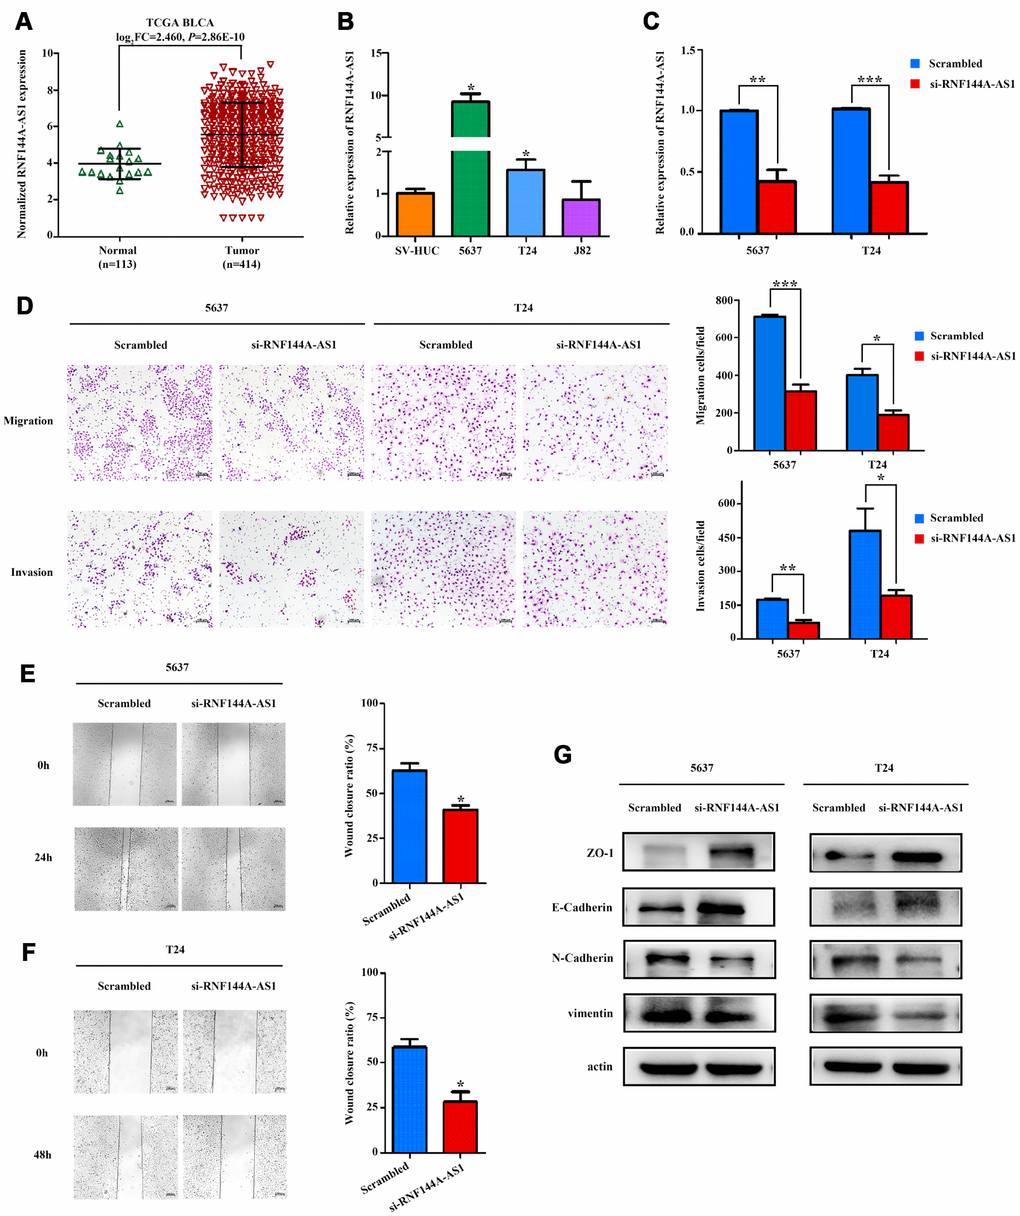 RNF144A-AS1 enhances the invasion and migration of bladder cancer cells in vitro. (A) The expression of RNF144A-AS1 in samples from TCGA-BLCA Project. (B) Quantitative real-time PCR analysis of RNF144A-AS1 expression in 5637, T24, J82 and SV-HUC cells. (C) Quantitative real-time PCR analysis of RNF144A-AS1 expression in RNF144A-AS1-silenced cells and scrambled-siRNA-treated cells. (D) The migration and invasion abilities of 5637 and T24 cells were assessed with Transwell assays after the knockdown of RNF144A-AS1. (Left panel) Representative images of migration (upper) and invasion (lower) assays. (Right panel) The number of cells that migrated or invaded are shown in the histogram. The effects of knocking down RNF144A-AS1 on the migration of 5637 (E) and T24 cells (F) were assessed with wound-healing assays. Representative images (left panel) and histogram (right panel). (G) The protein levels of E-cadherin, ZO-1, N-cadherin and Vimentin were detected by Western blotting in the RNF144A-AS1-knockdown group. Data are represented as the mean ± standard deviation of triplicate determinations from three independent experiments. Statistical significance was assessed with an unpaired Student’s t test (two-tailed test). *PPP